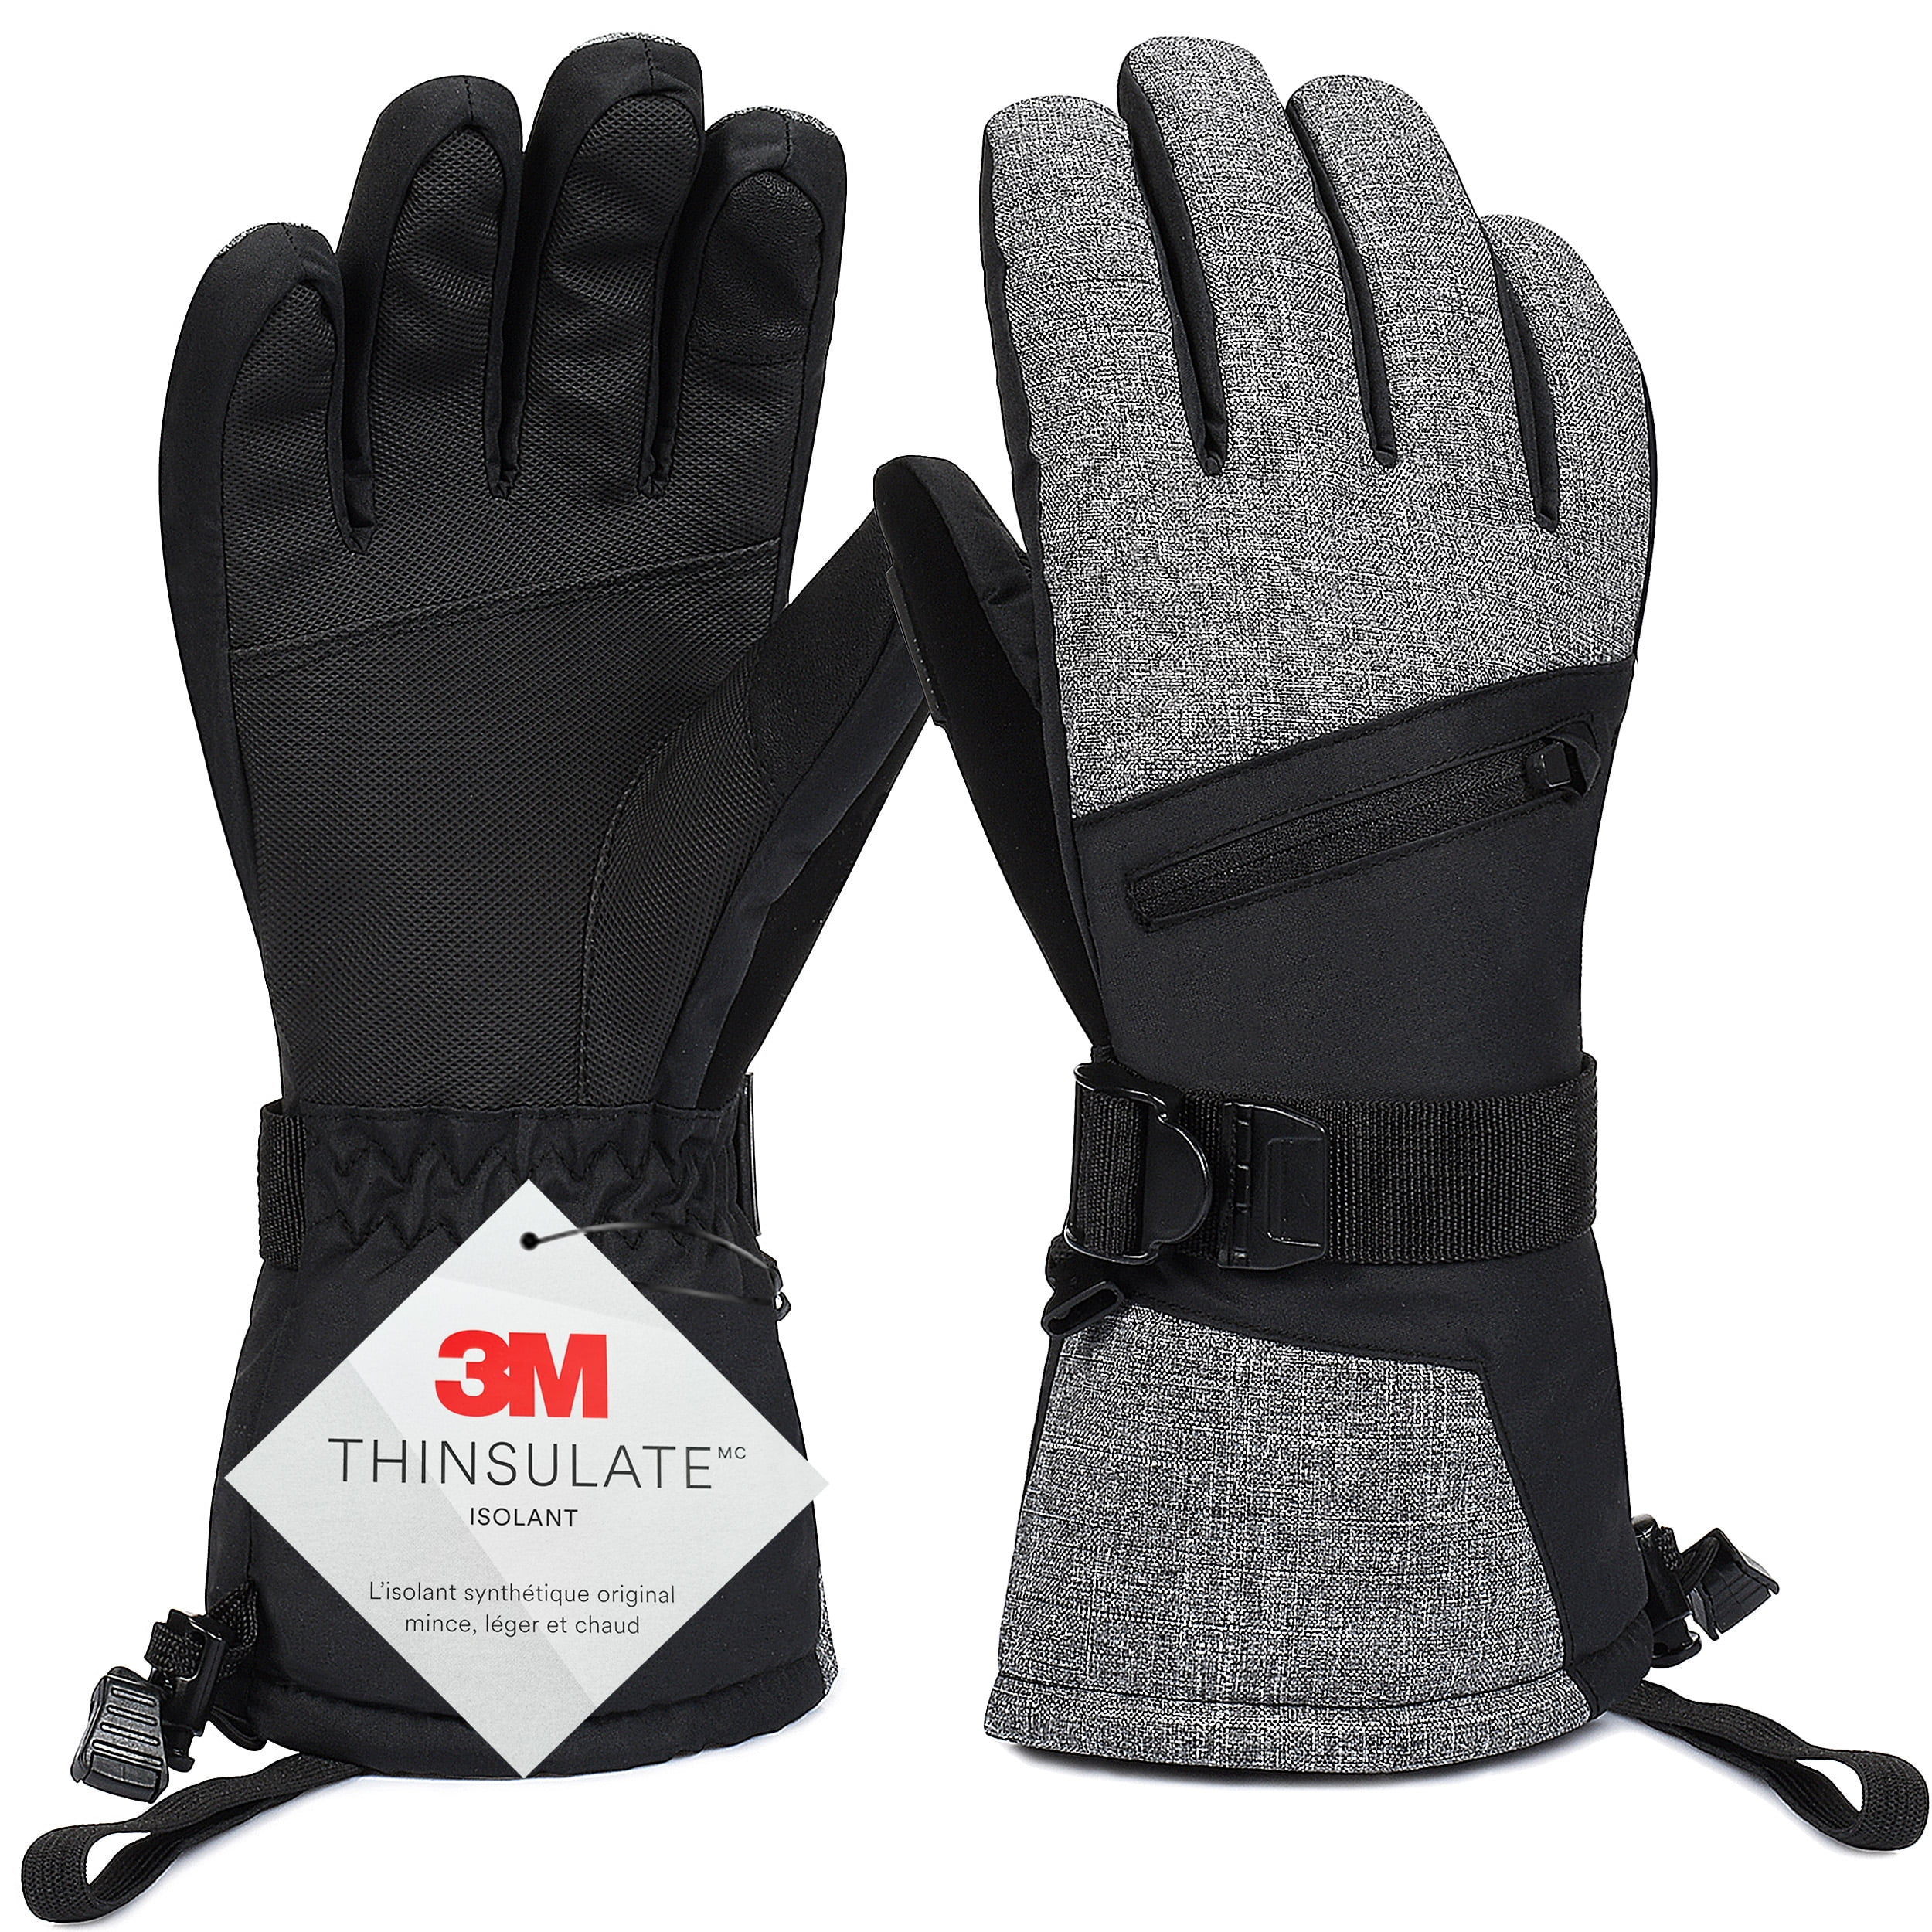 1 x MENS KNITTED WOOL THINSULATE SKI BREATHABLE GLOVE 